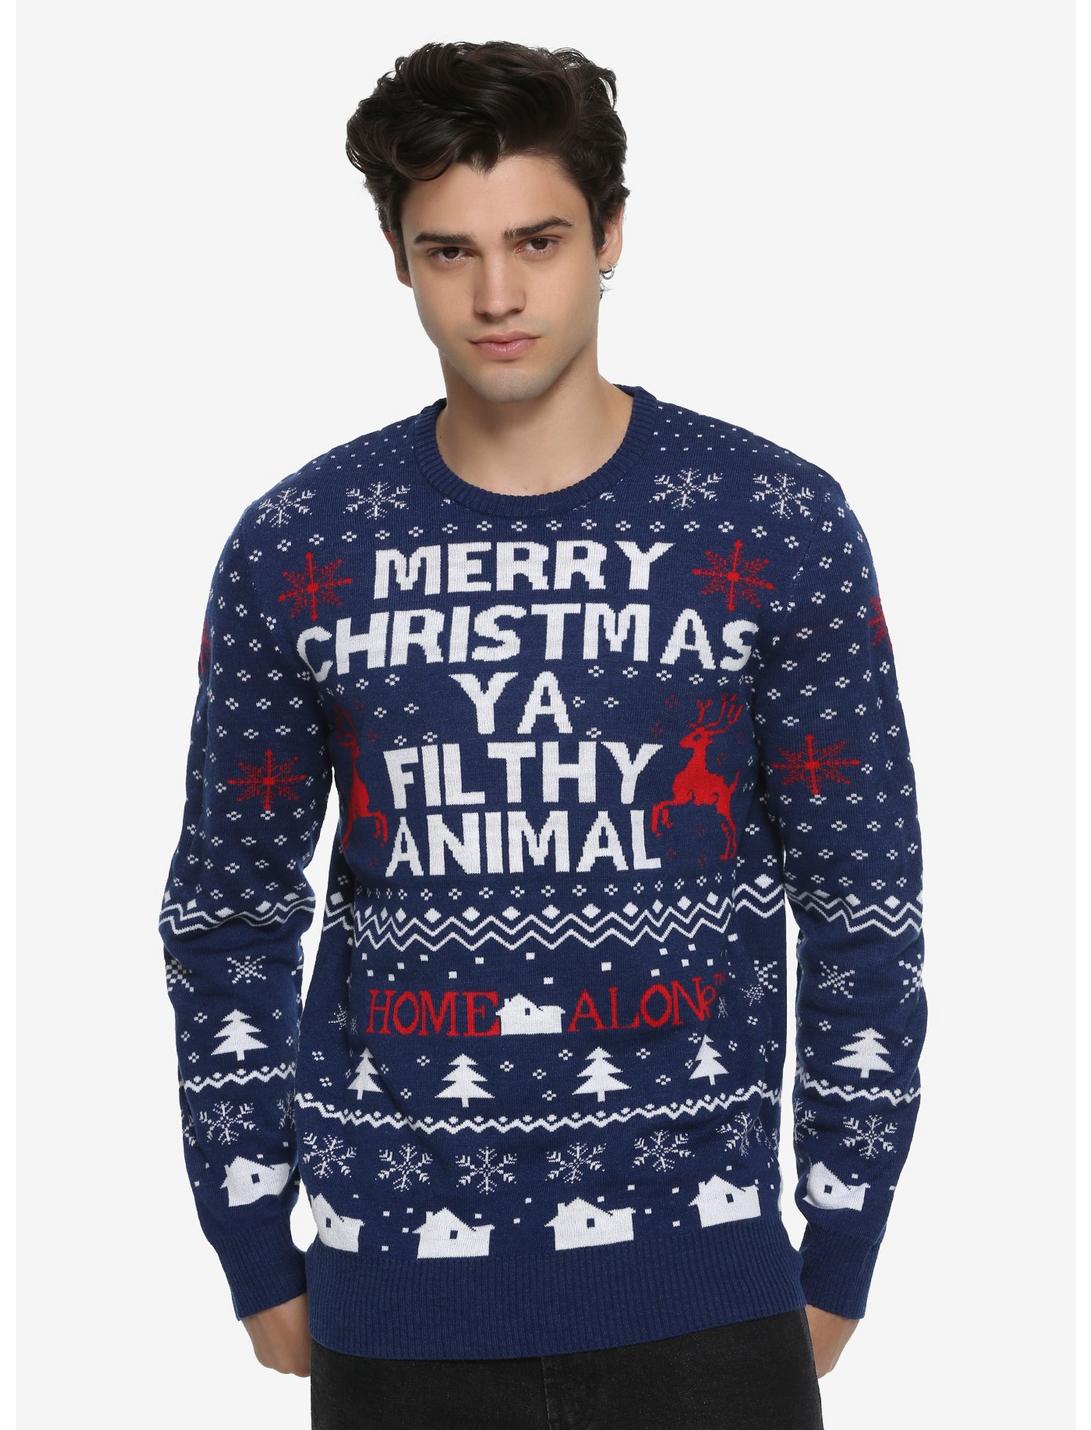 Home Alone Filthy Animal Fair Isle Sweater, NAVY, hi-res